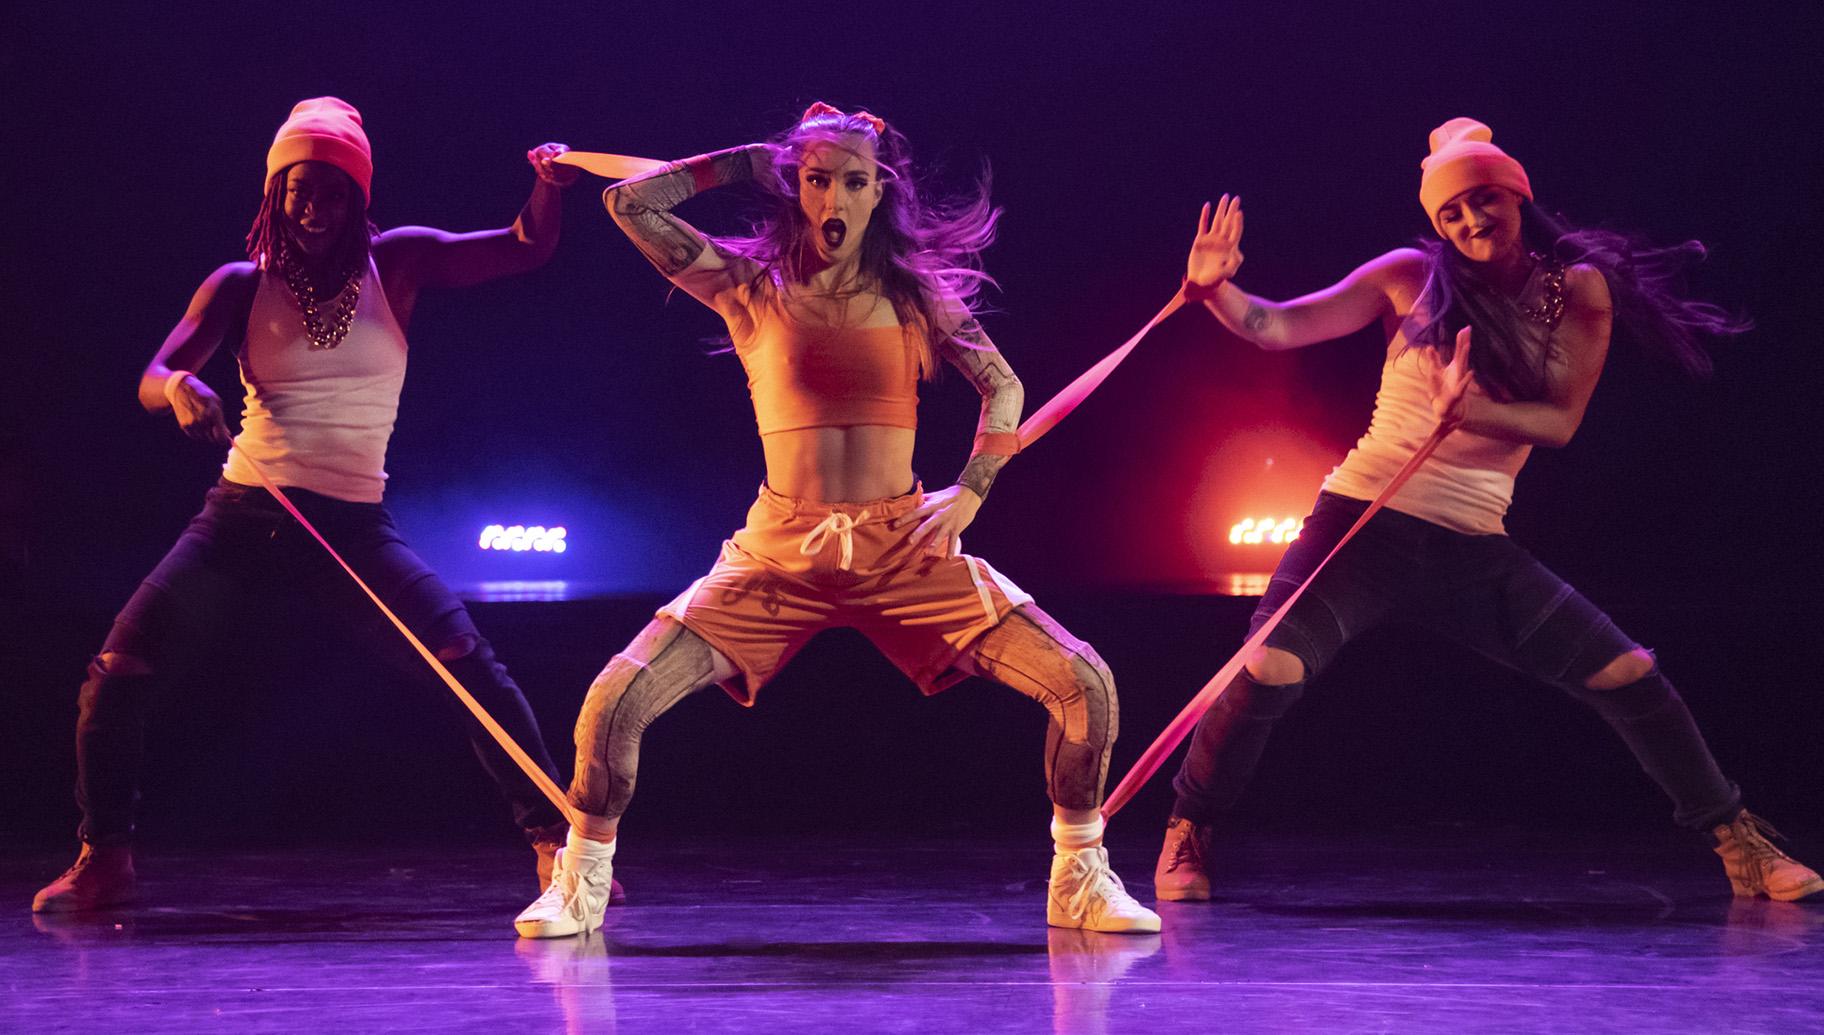 From left: Porscha Spells, KC Bevis and Kelsey Reiter in the Chicago Dance Crash world premiere production of “Lil Pine Nut: The Learning Curve of Pinocchio.” (Photo by Ashley Deran)